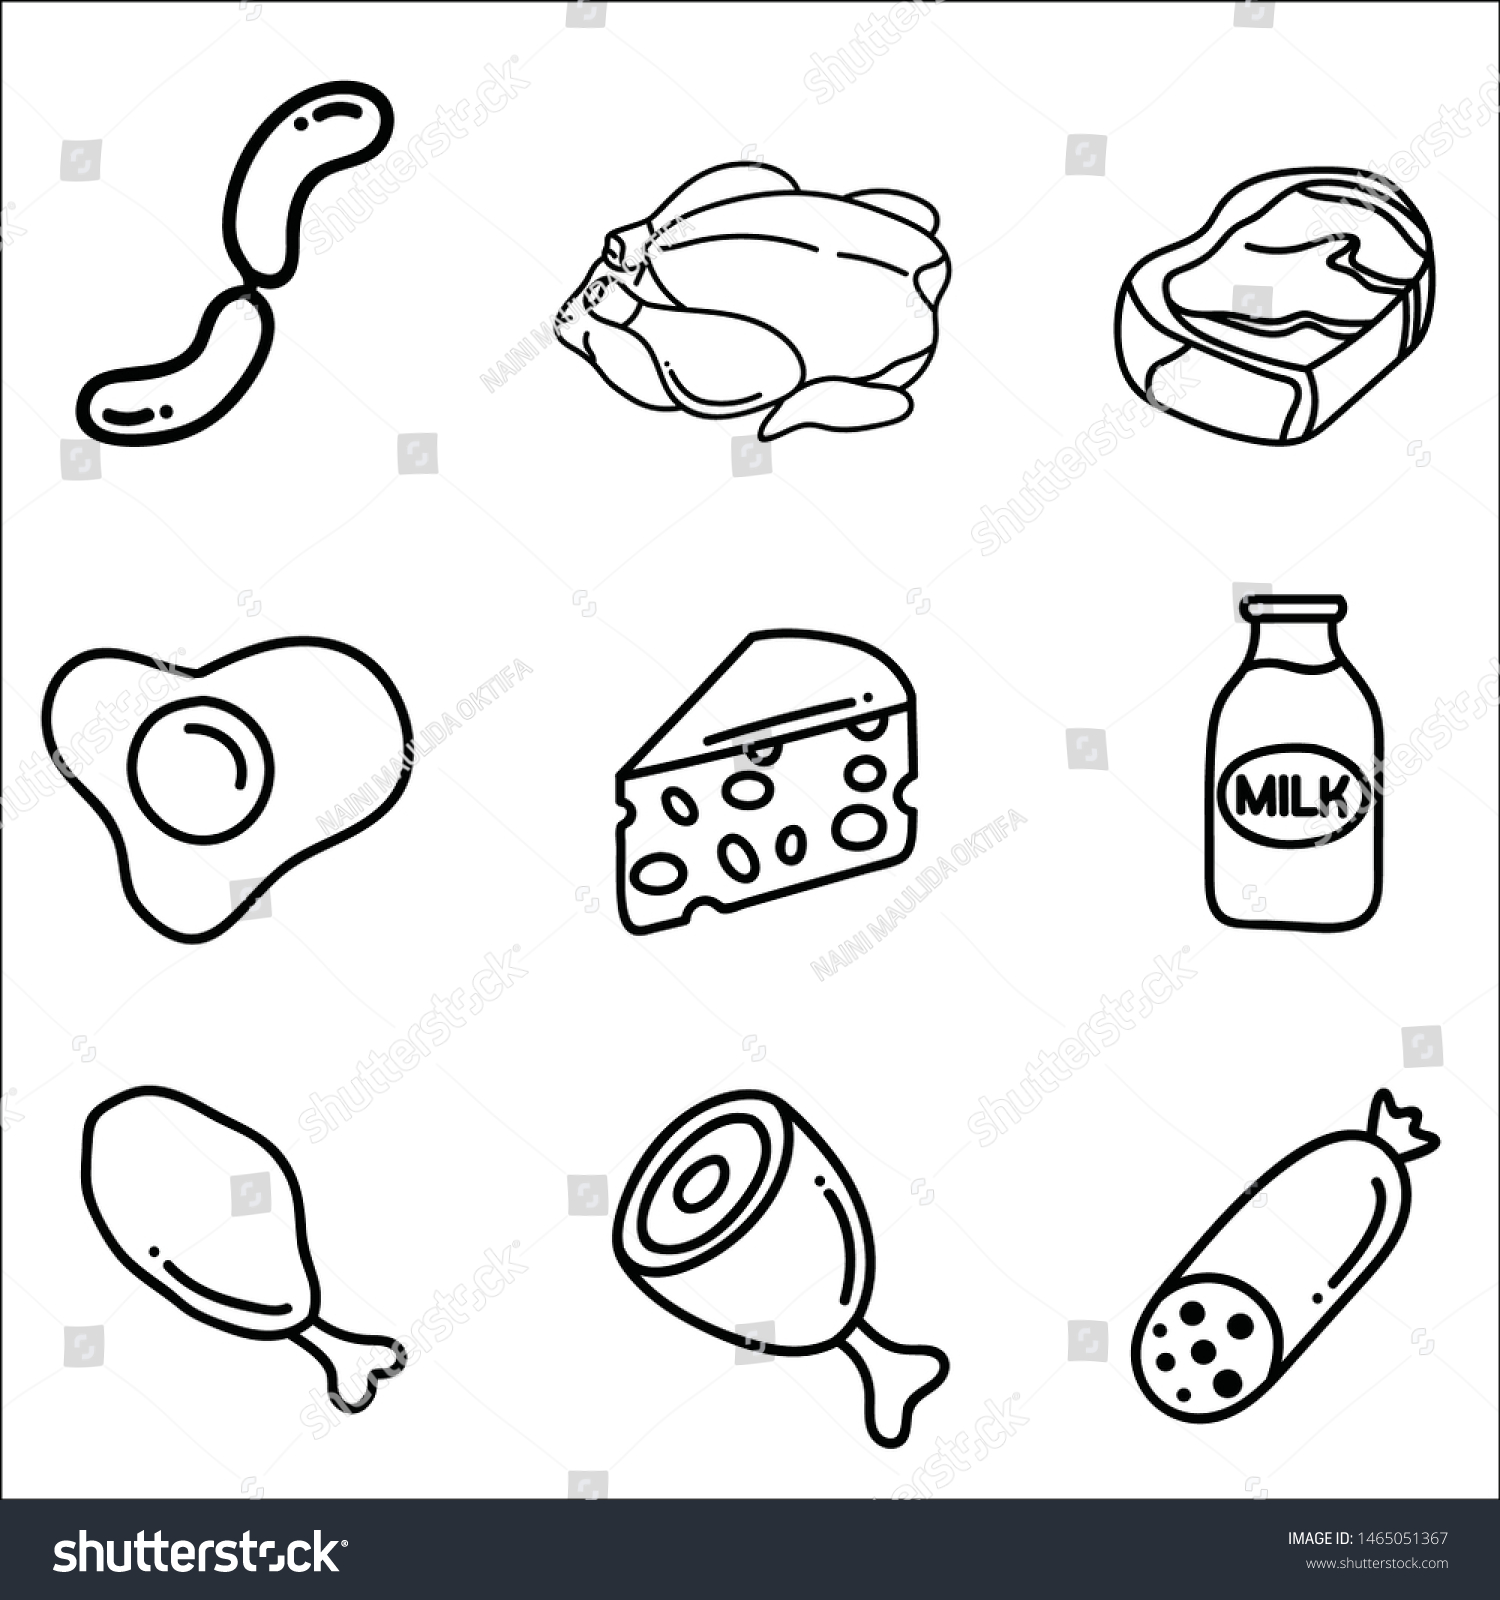 Protein Food Icons Collection Healthy Diet Stock Vector Royalty Free 1465051367 Shutterstock 1023